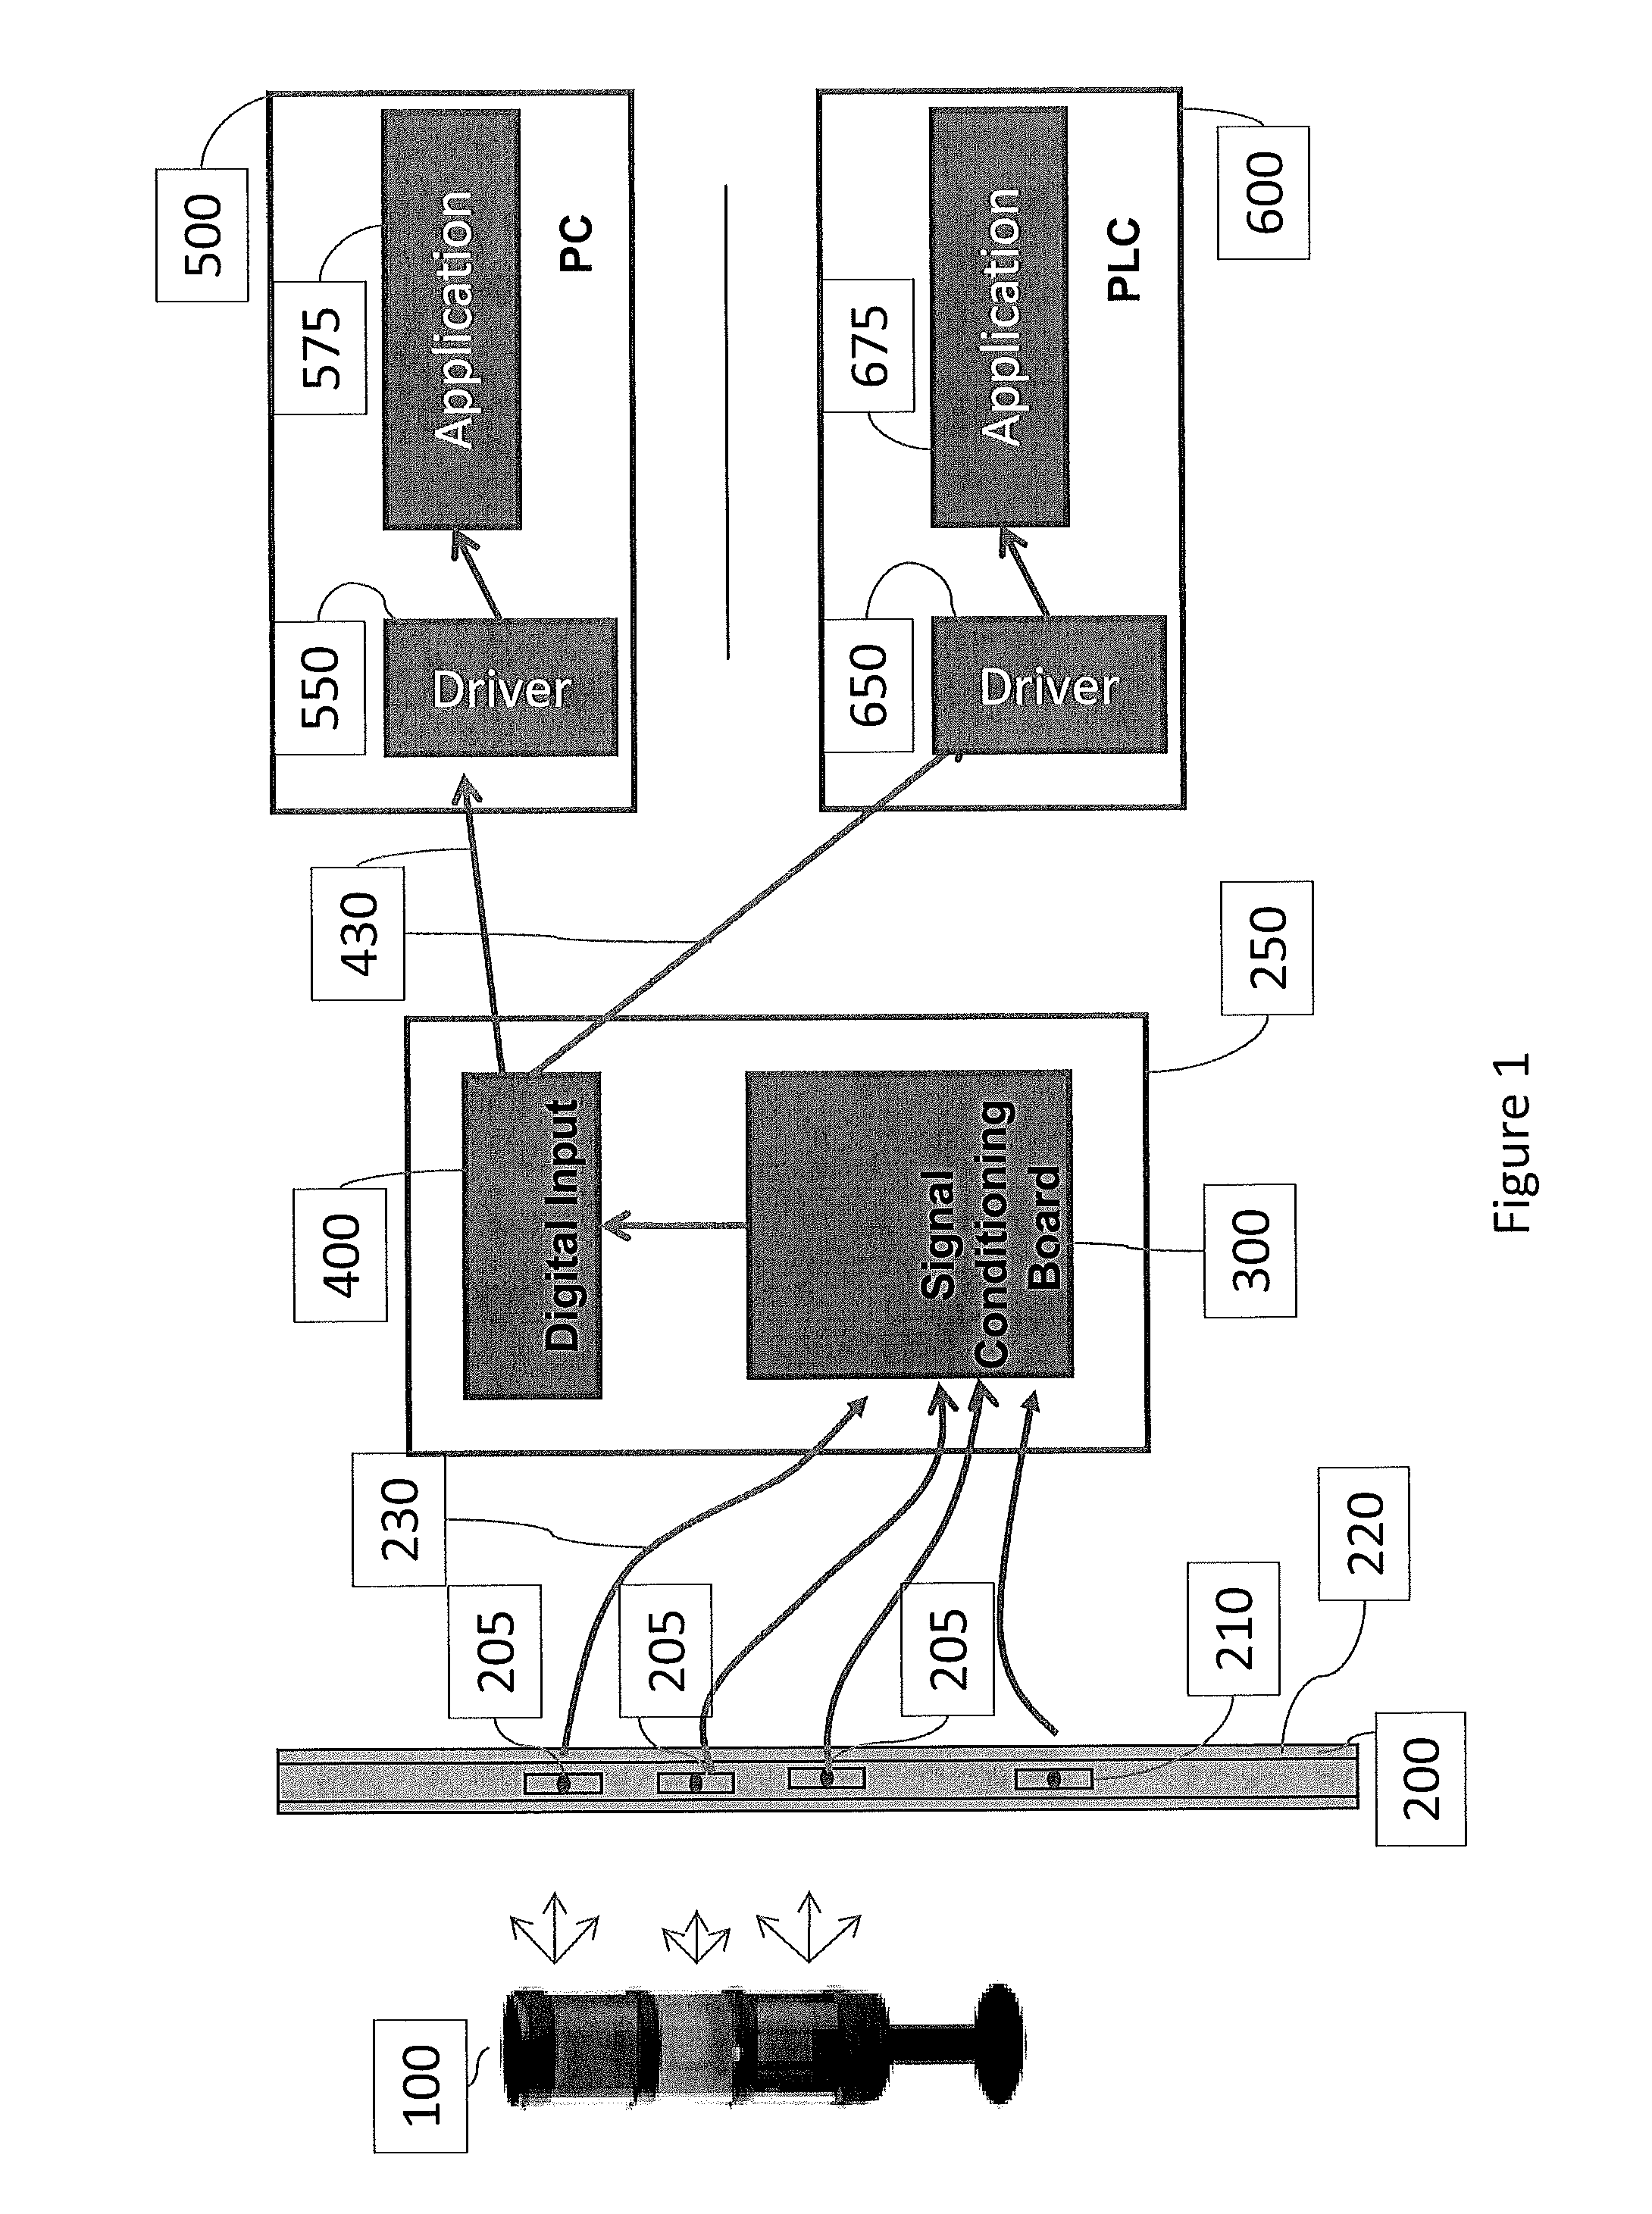 System and Method to Collect Status Information From Light Based Indicator Systems Such as Stack Lights, Status Lights, Traffic Lights, Safety Lights